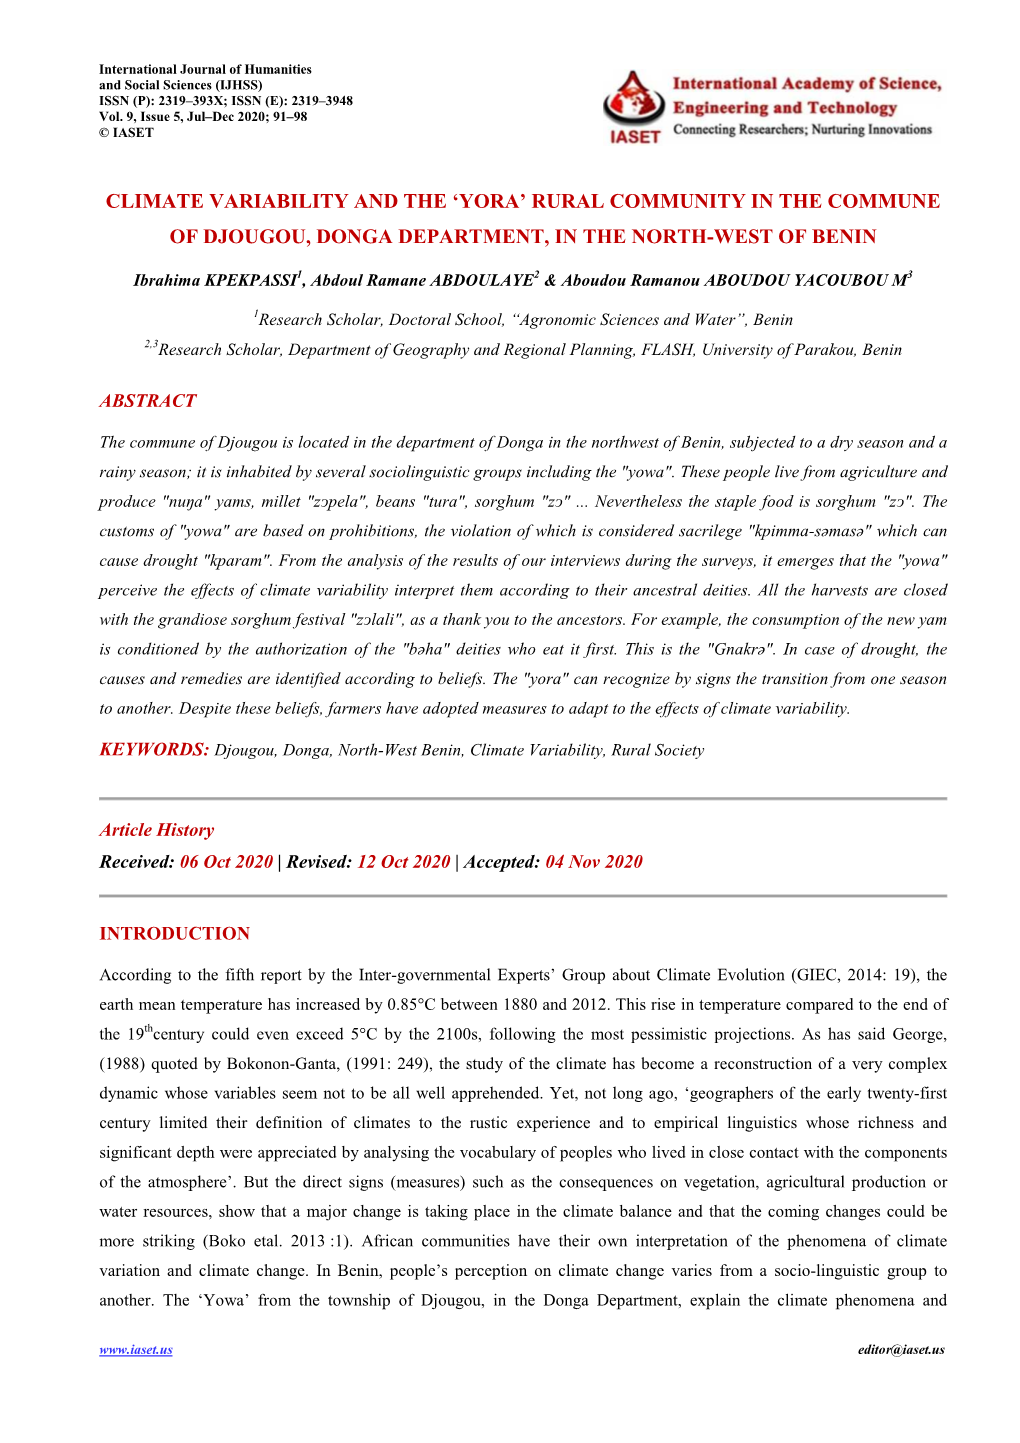 Climate Variability and the ‘Yora’ Rural Community in the Commune of Djougou, Donga Department, in the North-West of Benin